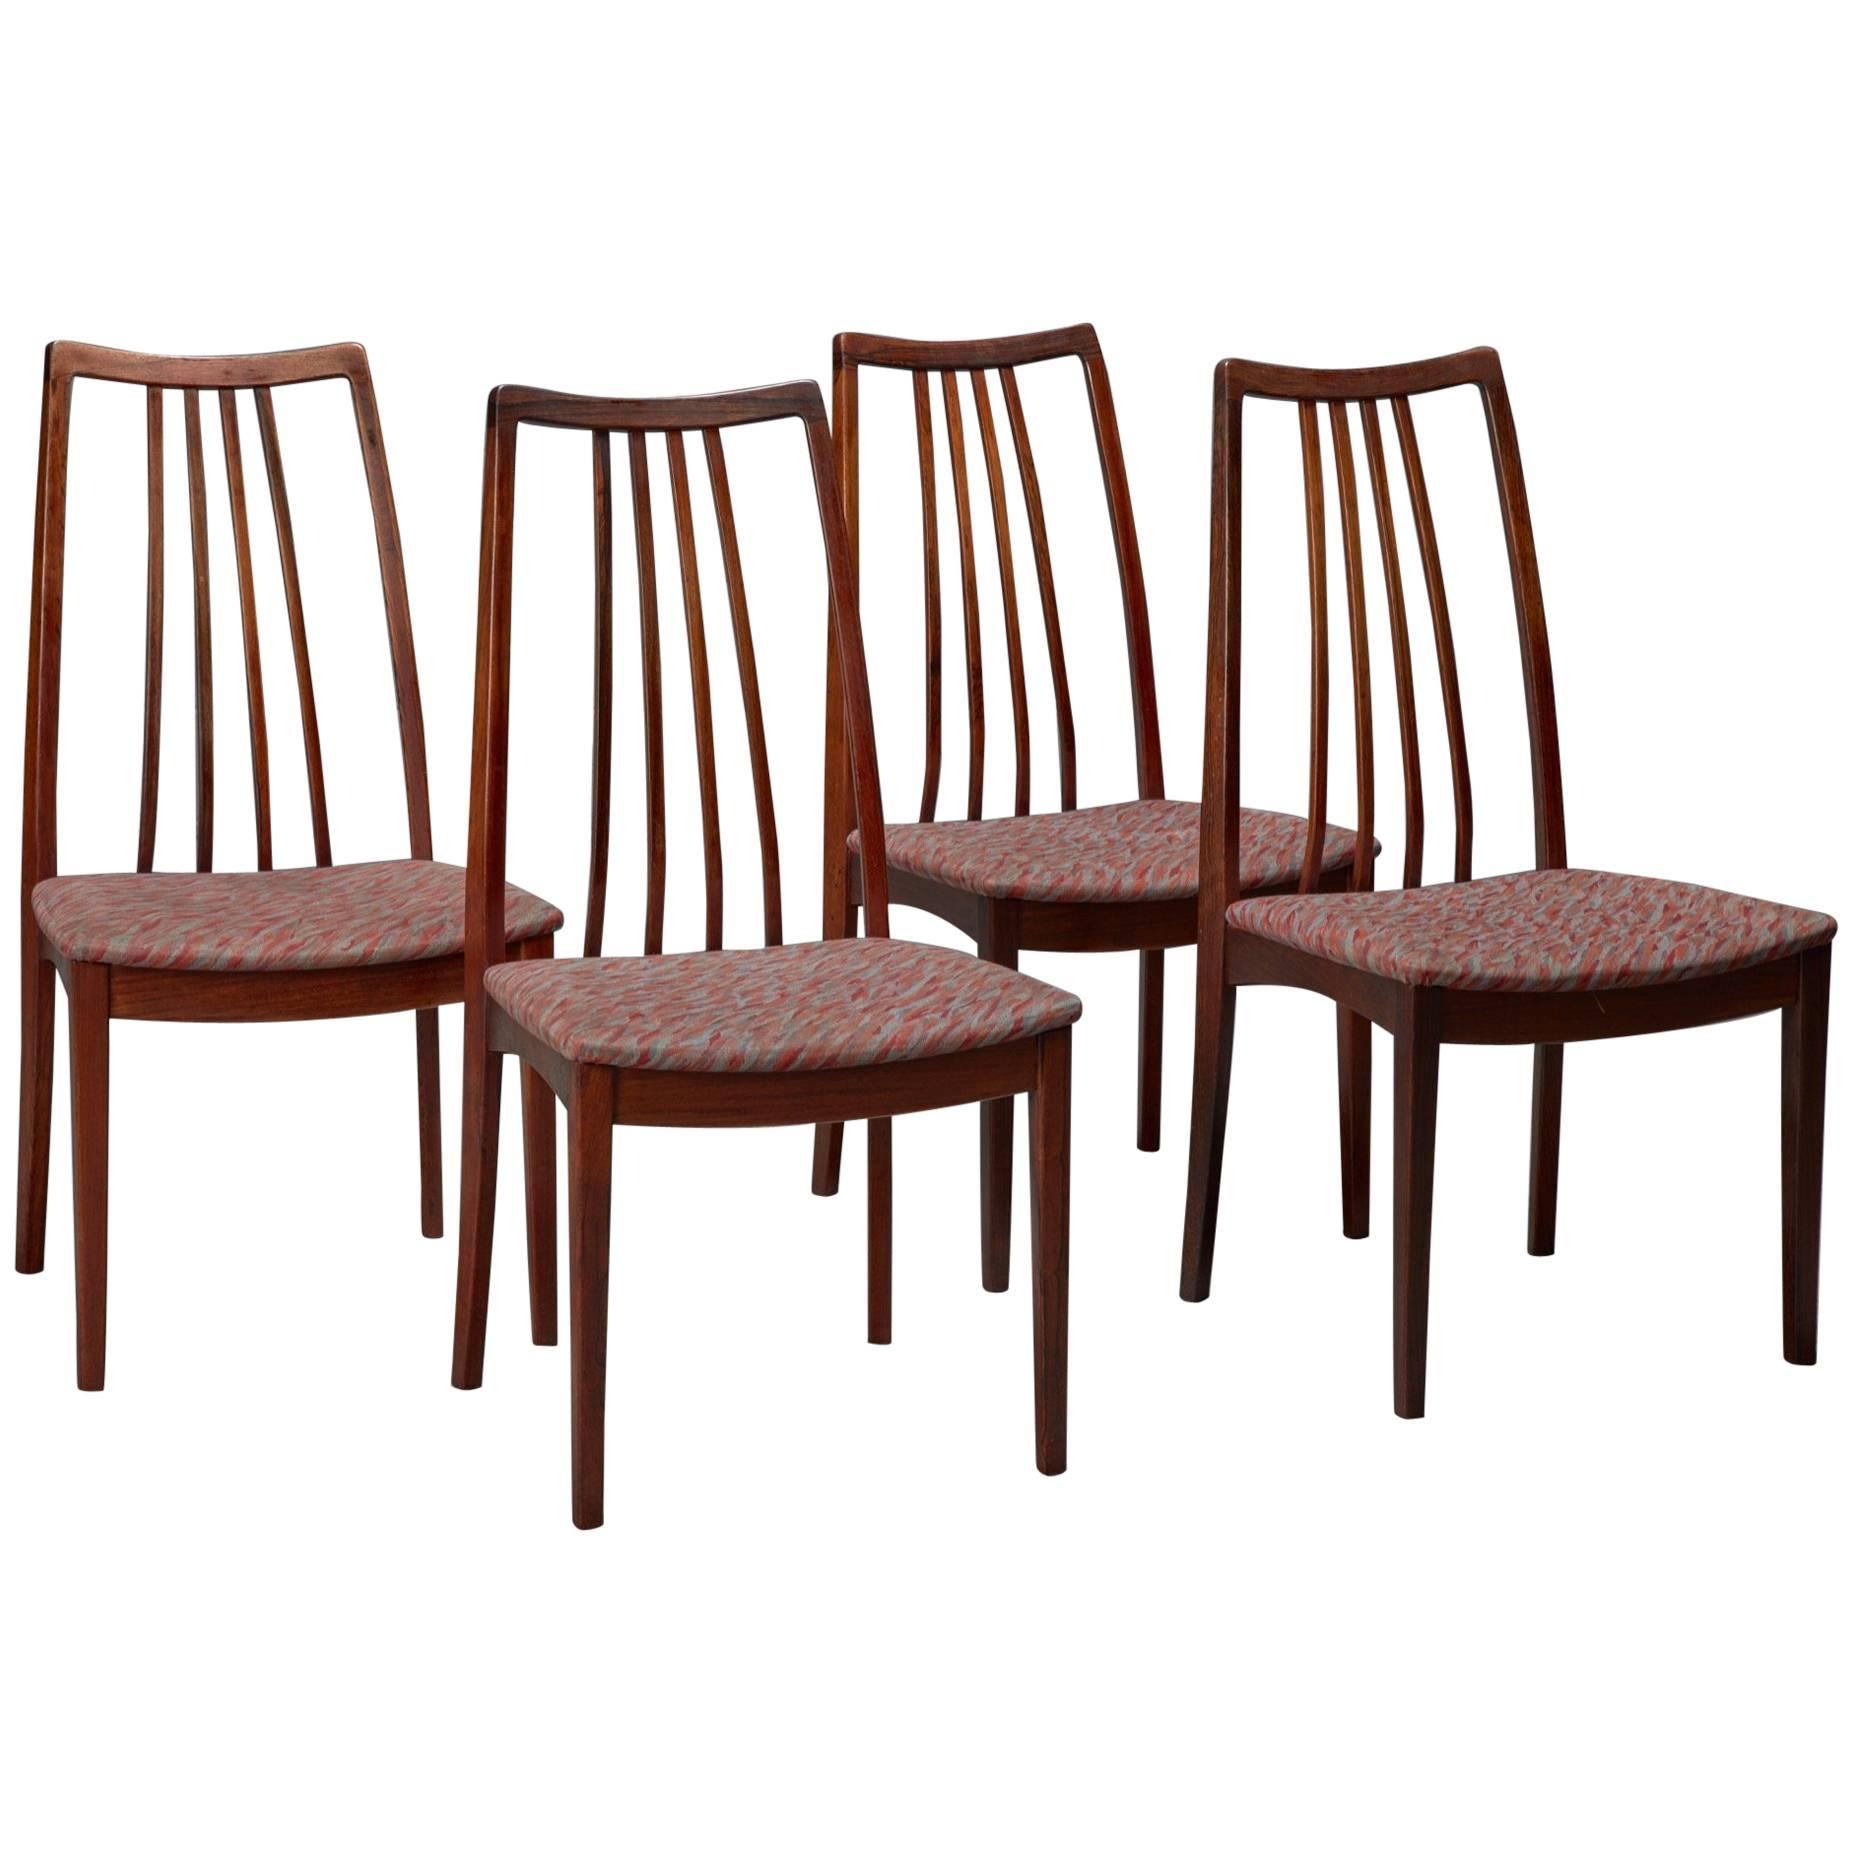 Set of Four Danish Rosewood High Back Dining Chairs